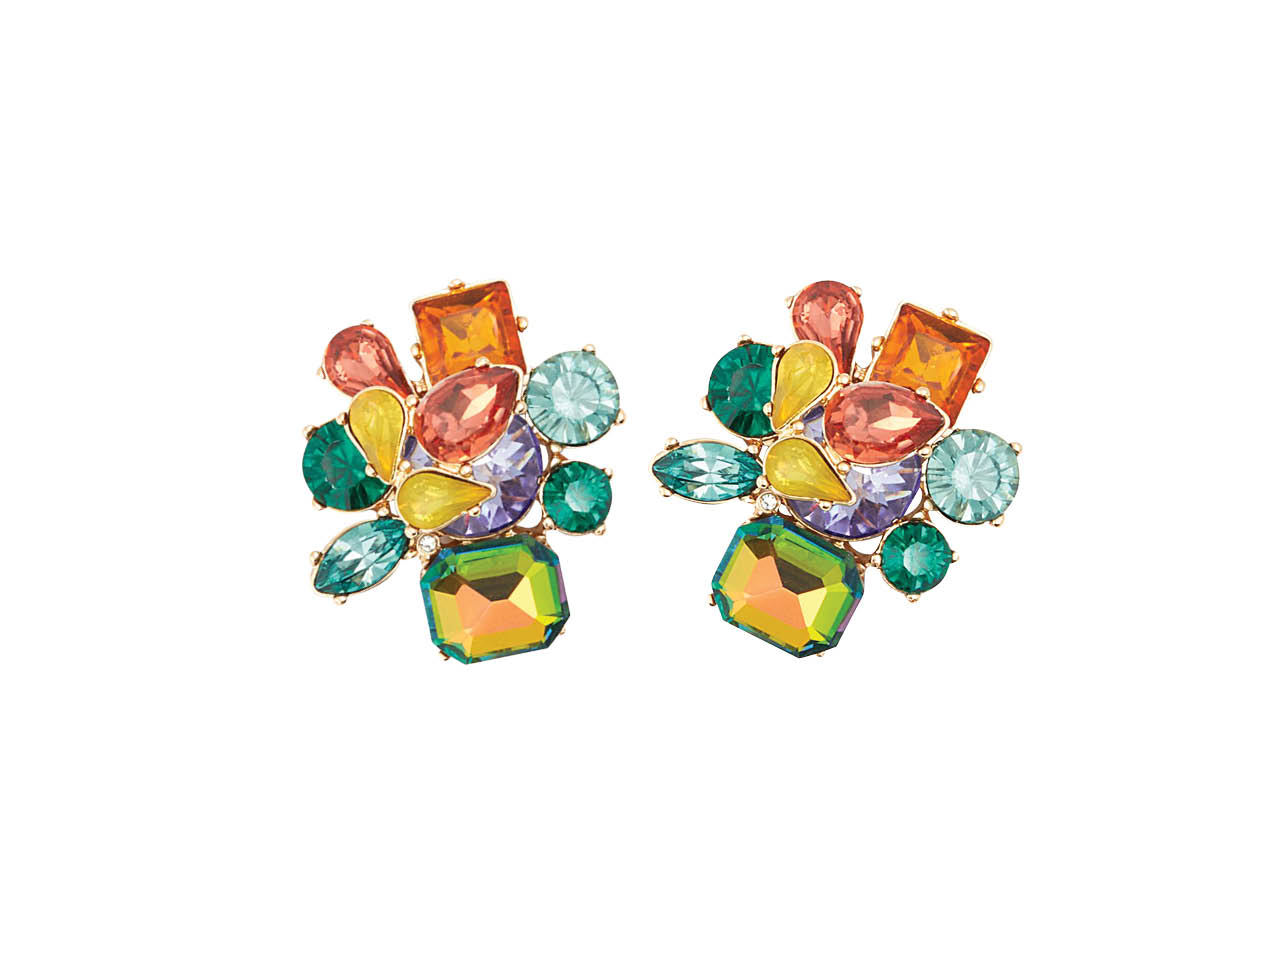 Aldo's cluster earrings in tones of orange, yellow and green are perfect for summer outfits.